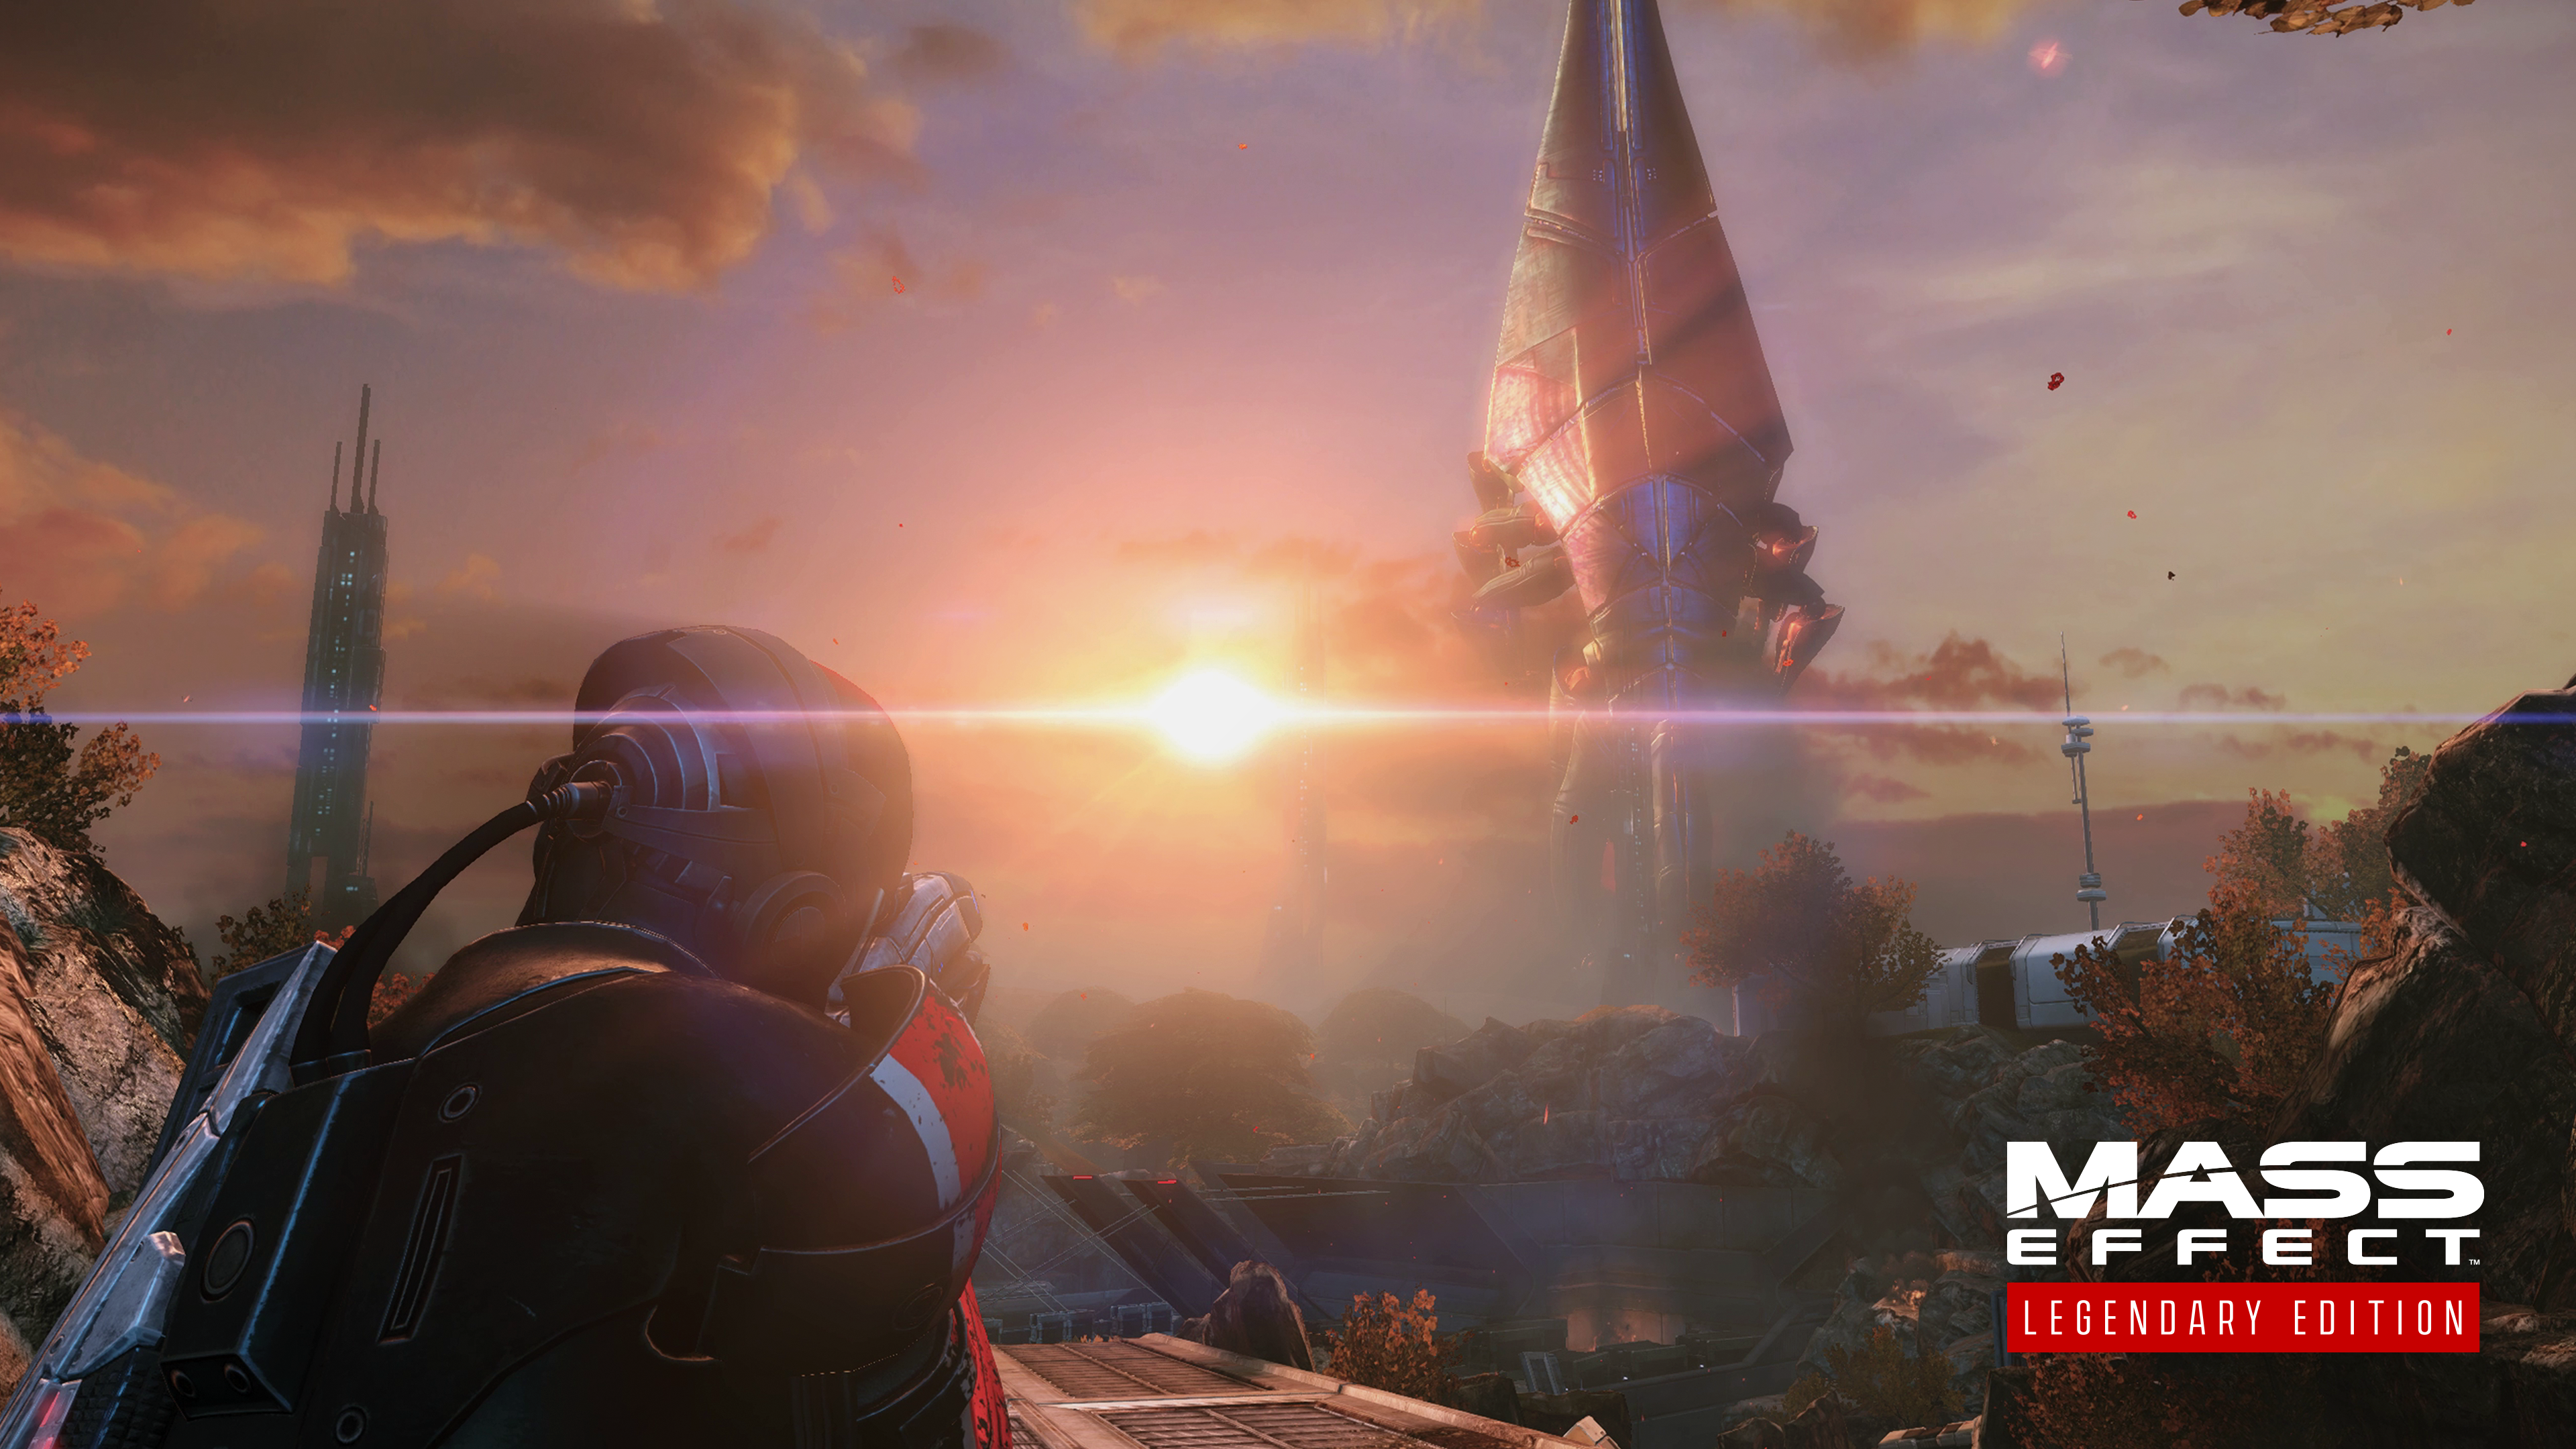 Mass Effect Mass Effect 2 Mass Effect 3 Mass Effect Legendary Edition Video Games Remastered Collect 3840x2160